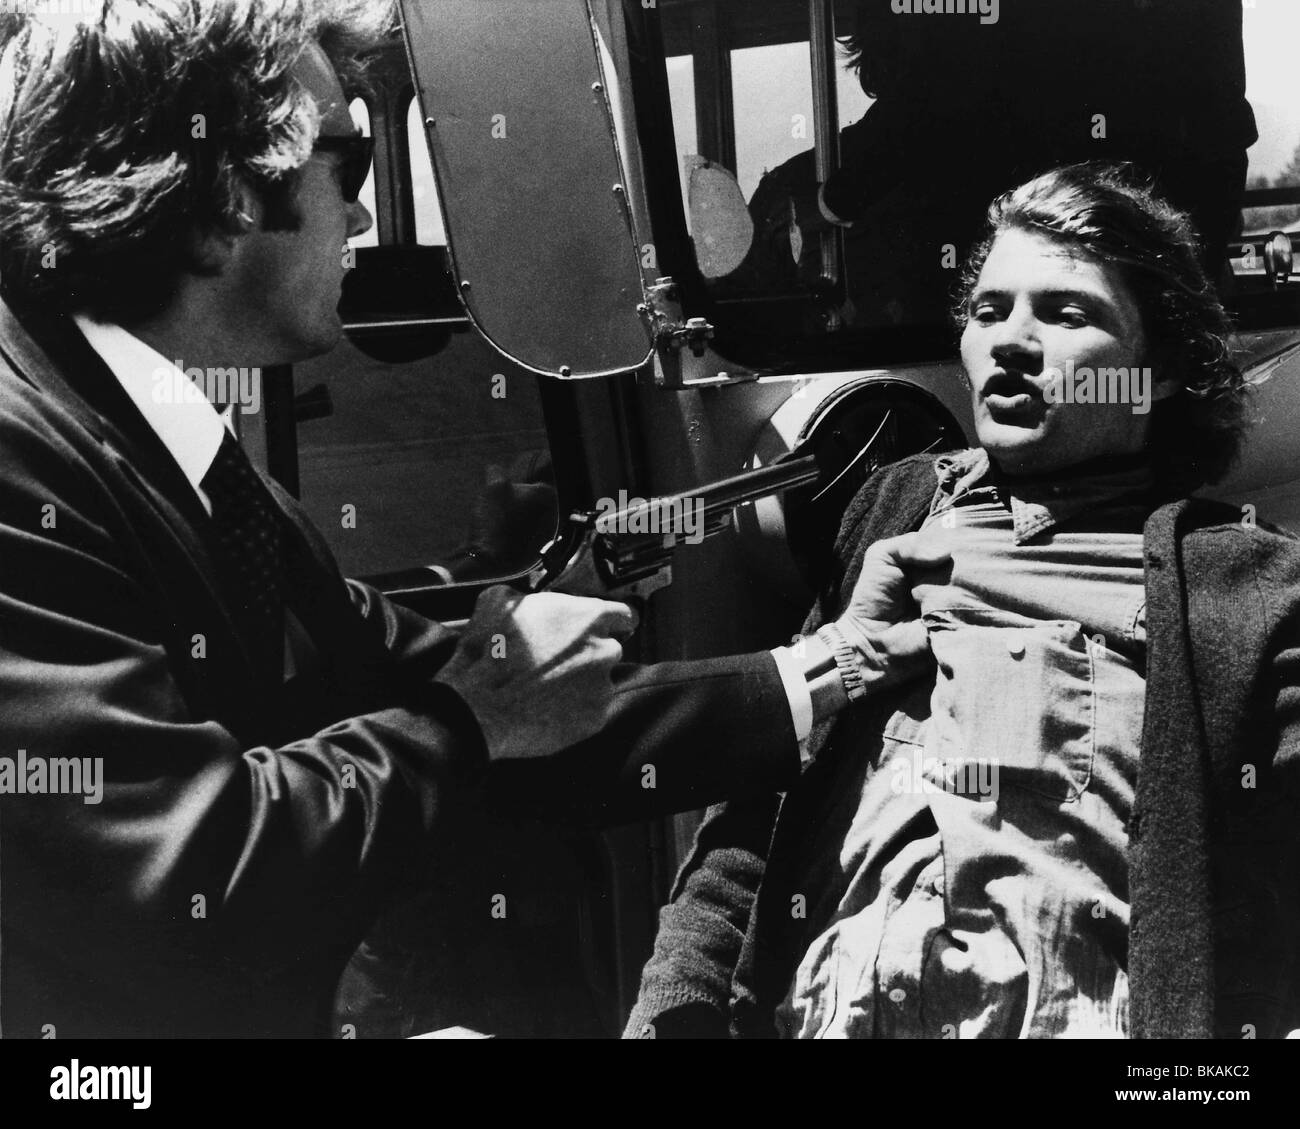 DIRTY HARRY (1971) CLINT EASTWOOD, ANDREW ROBINSON DTH 016P Stockfoto